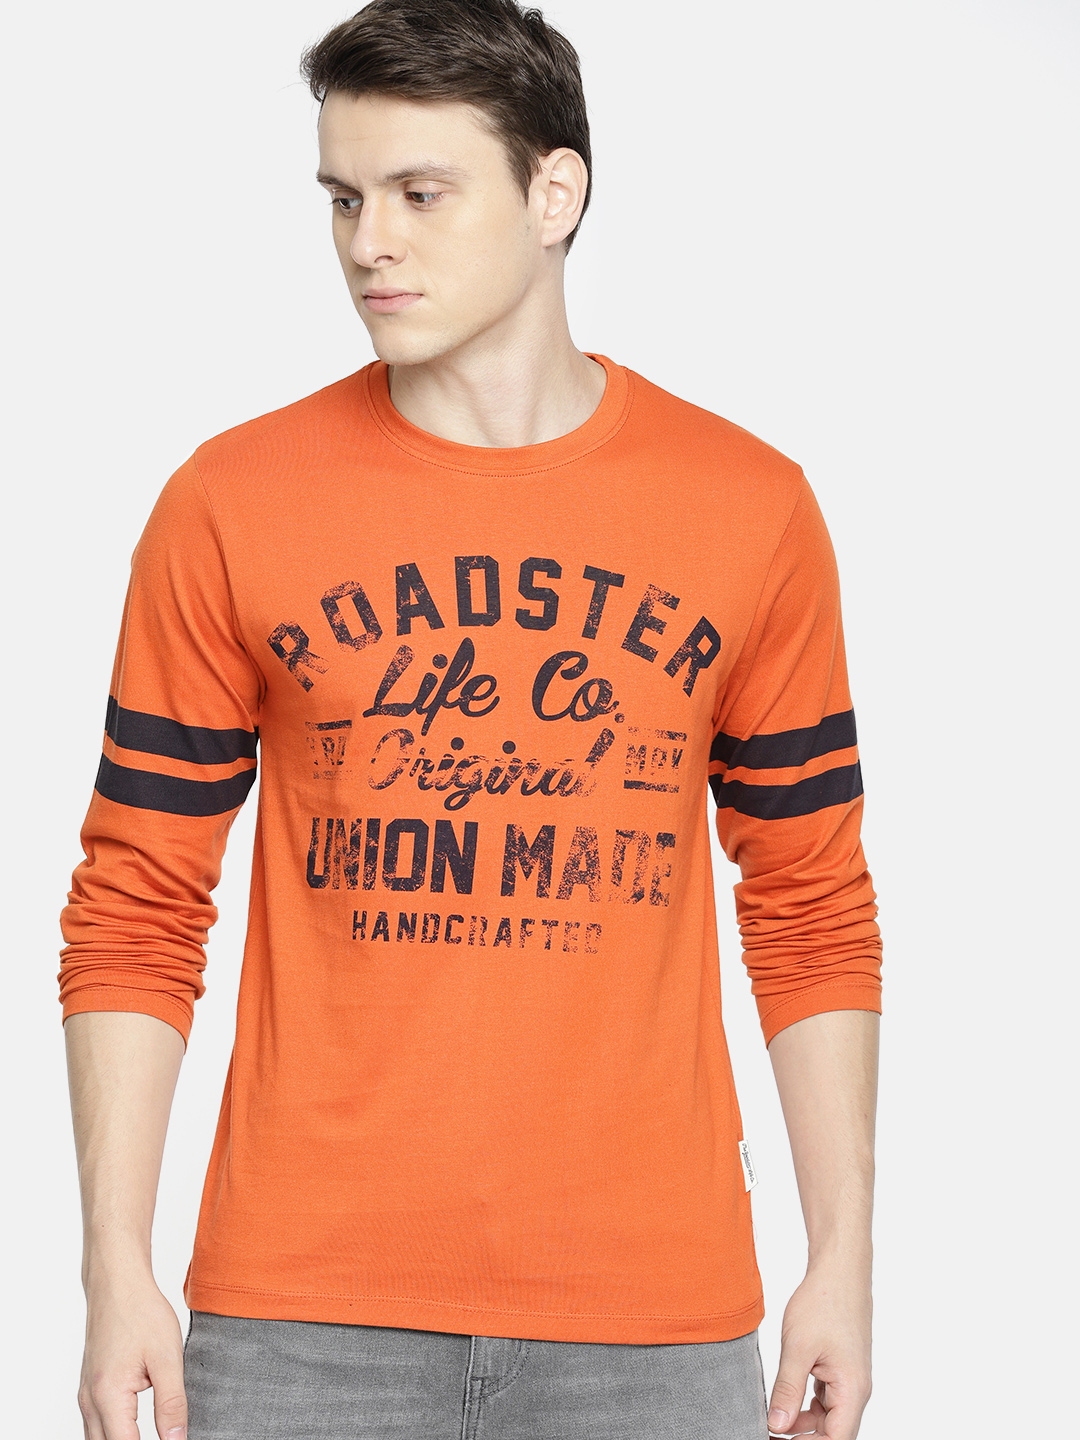 Buy The Roadster Lifestyle Co Men Orange Printed Round Neck Pure Cotton ...